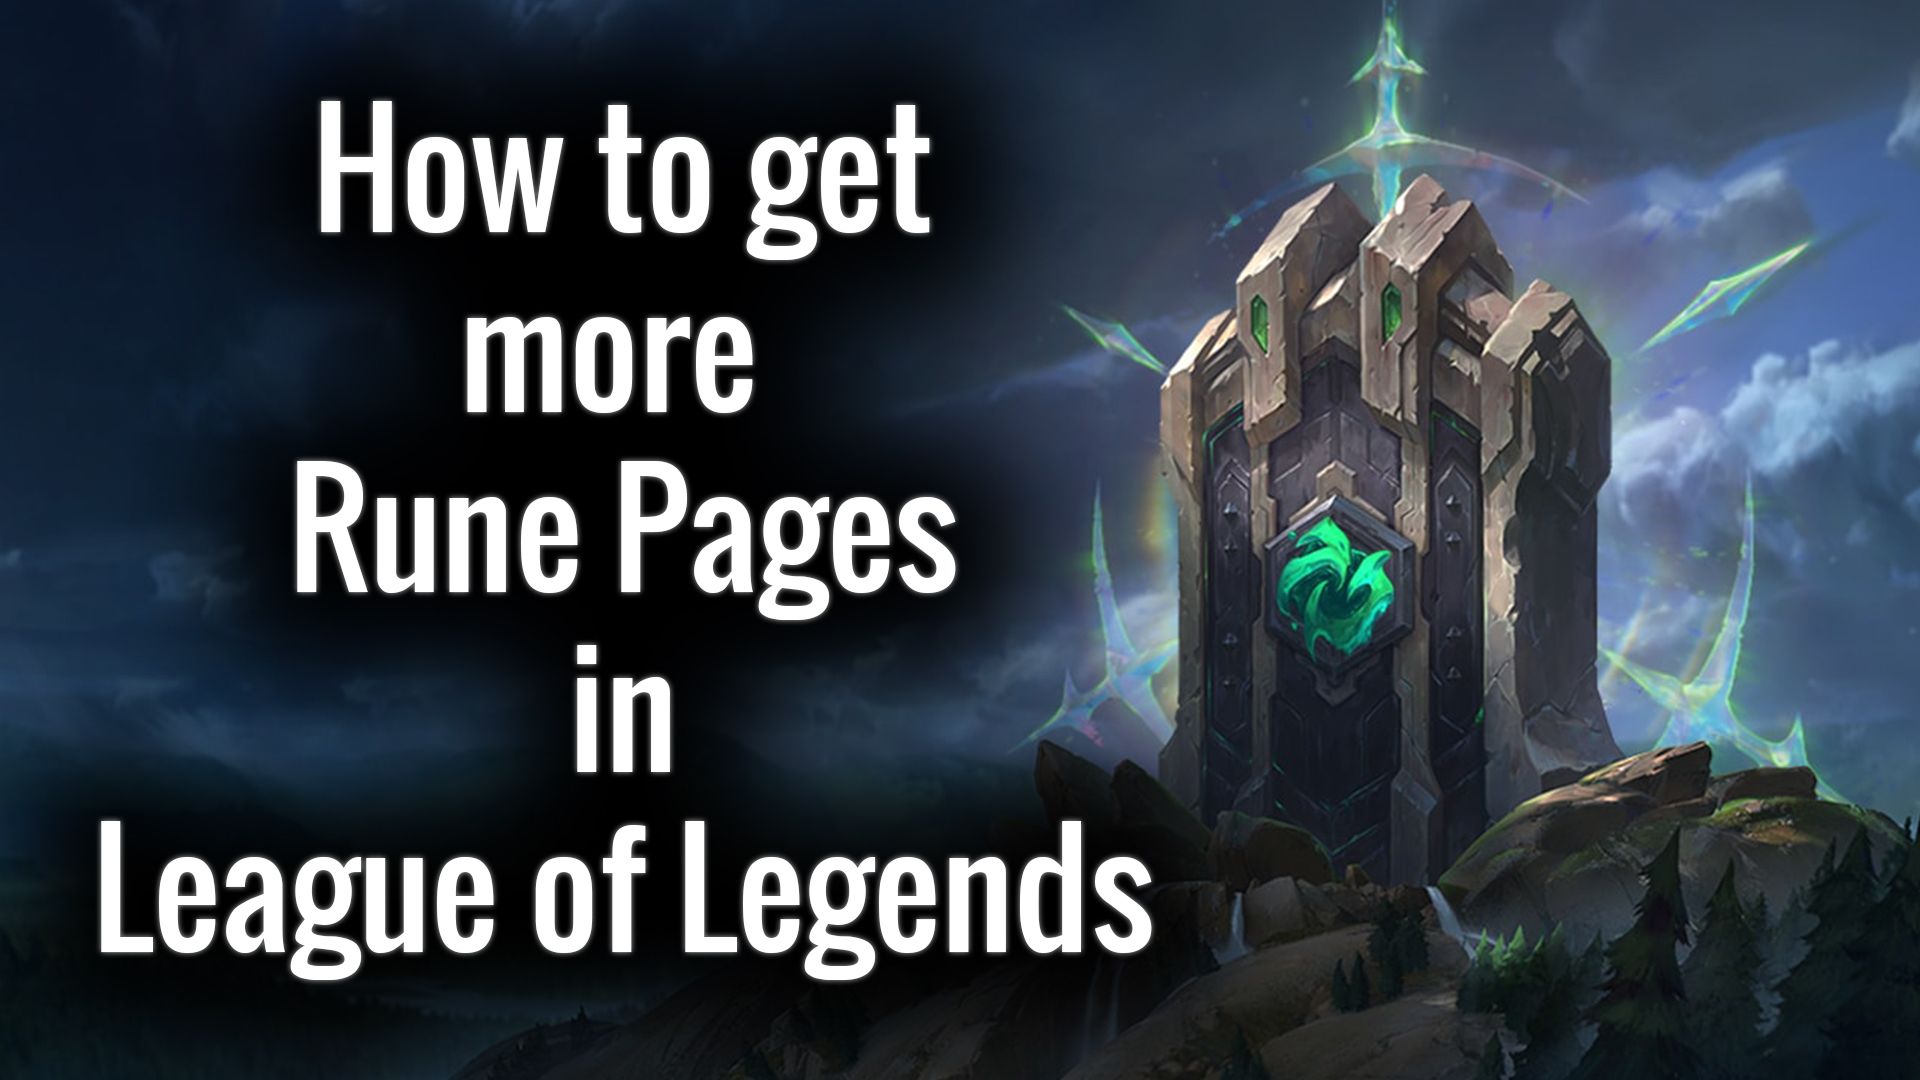 Getting more rune pages in League of Legends